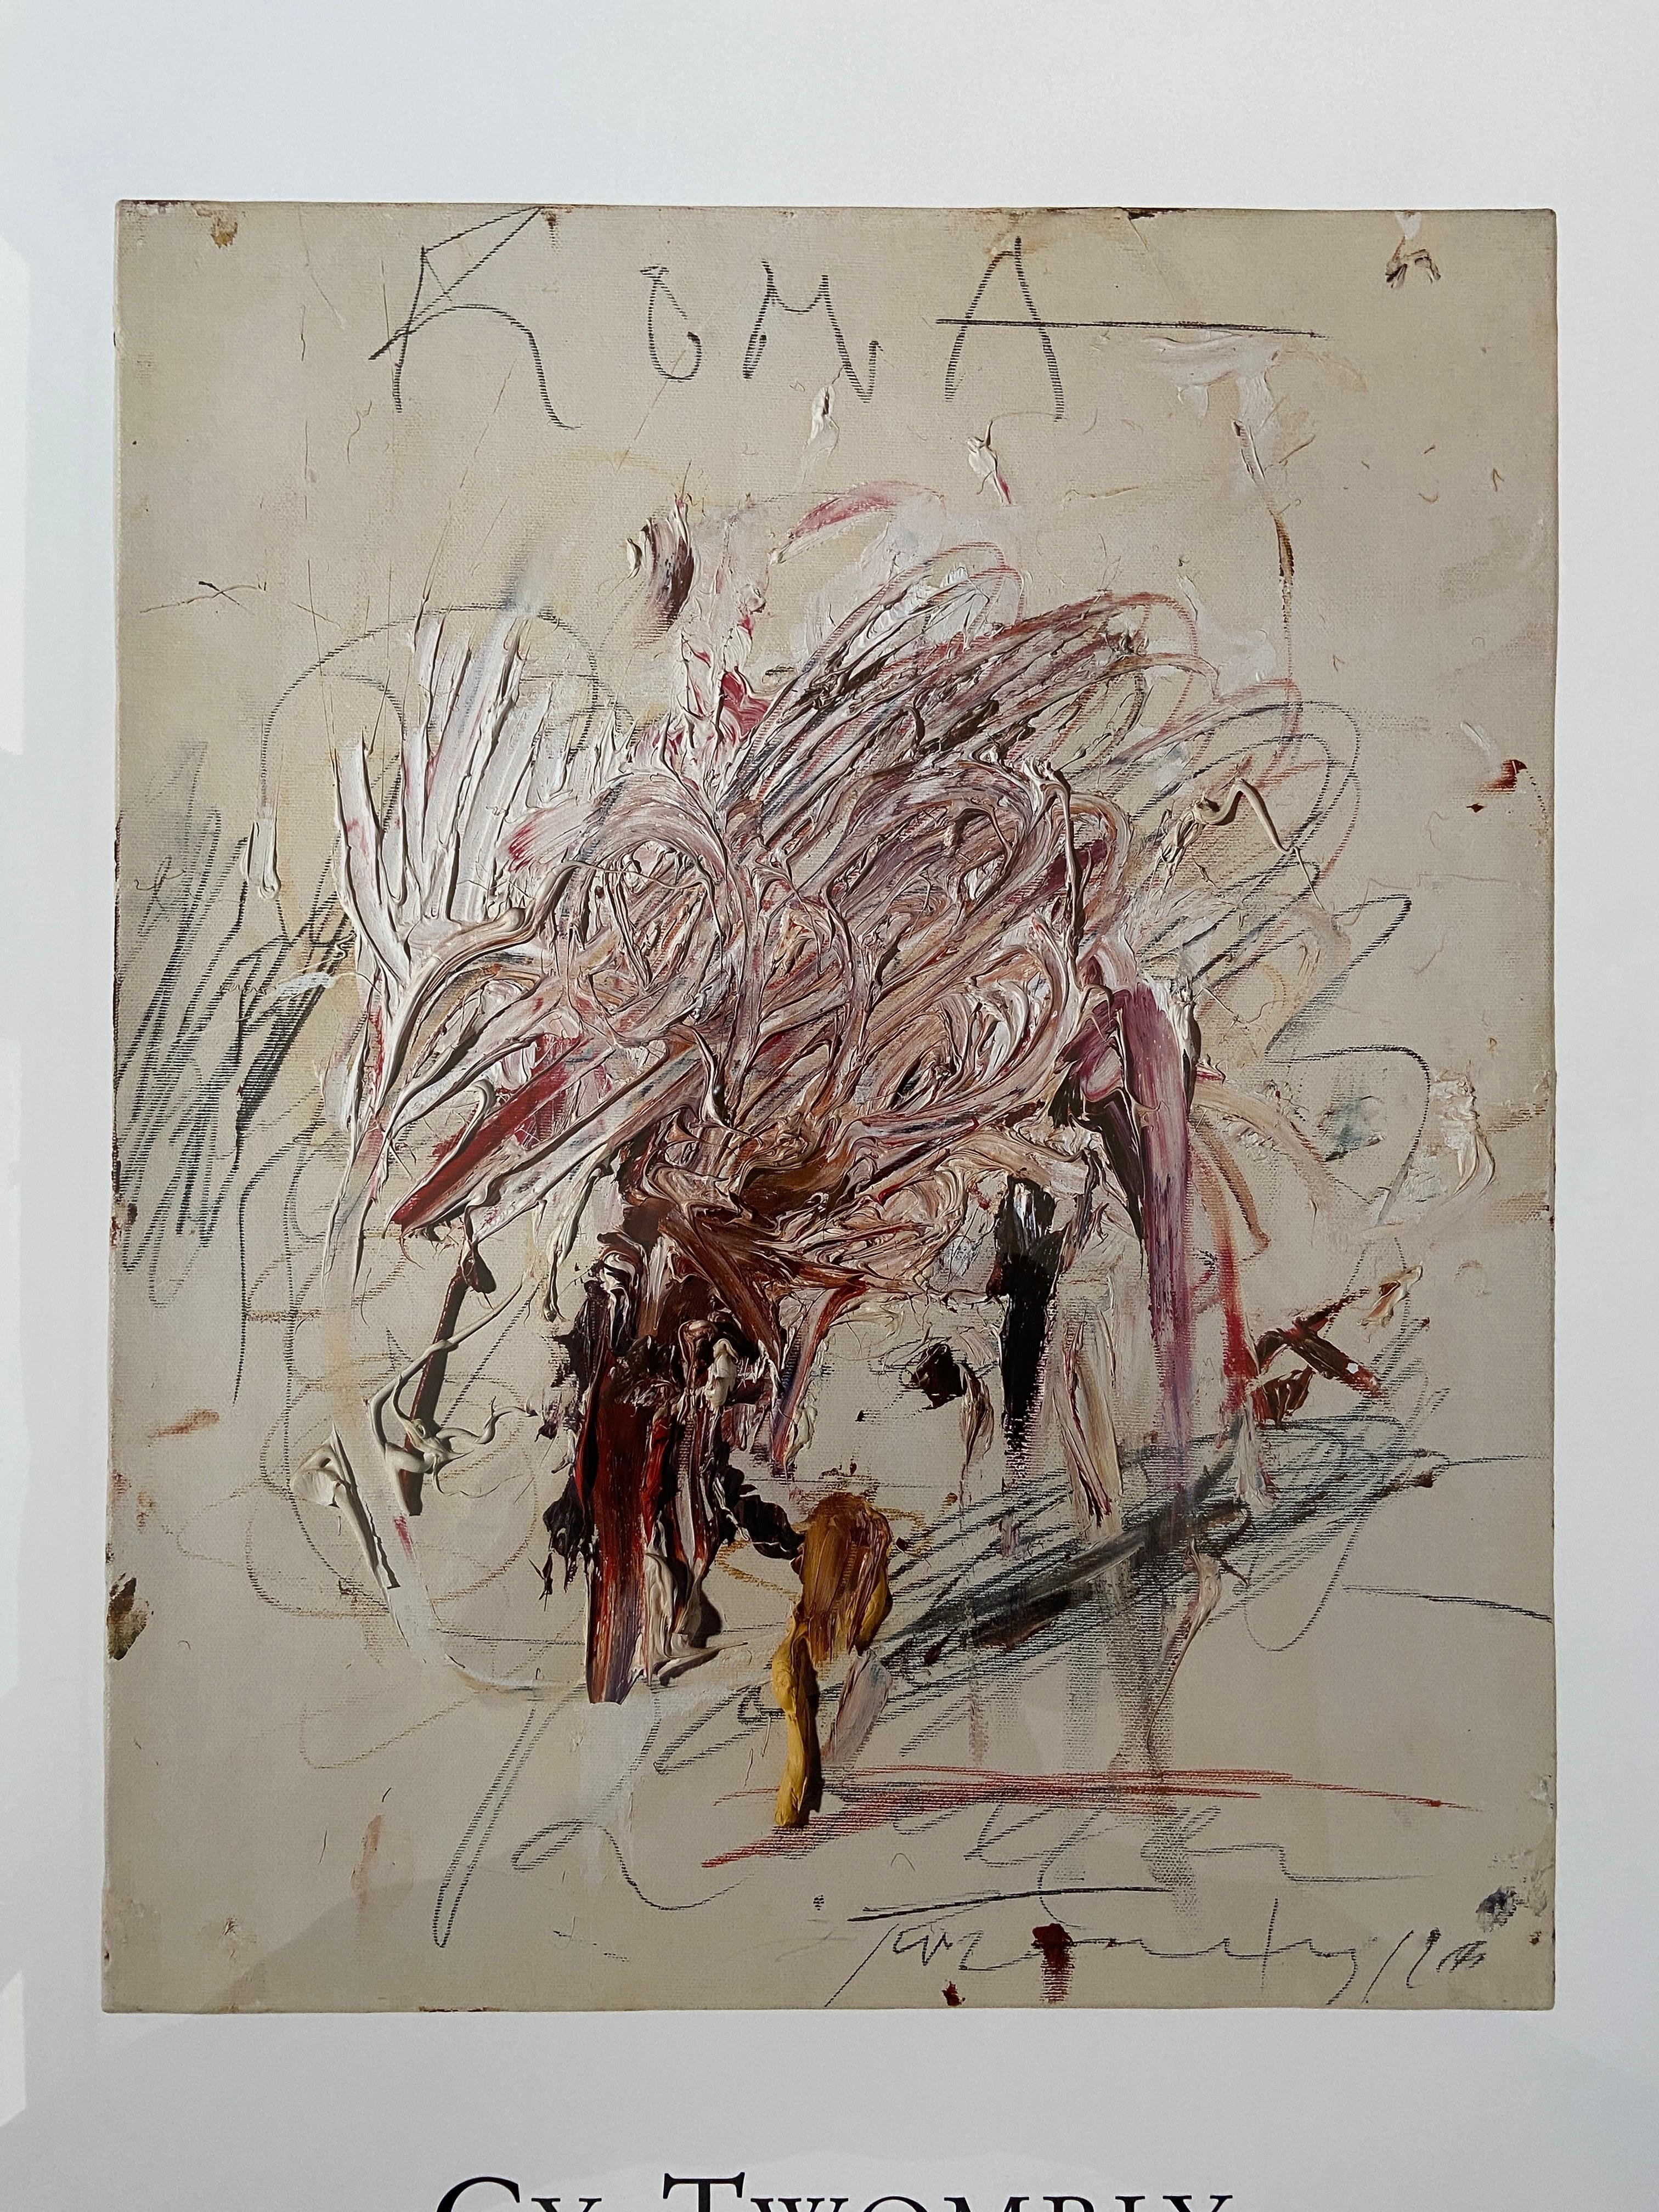 Late 20th Century Vintage Cy Twombly Galerie Karsten Greve Exhibition Poster, Germany, 1997